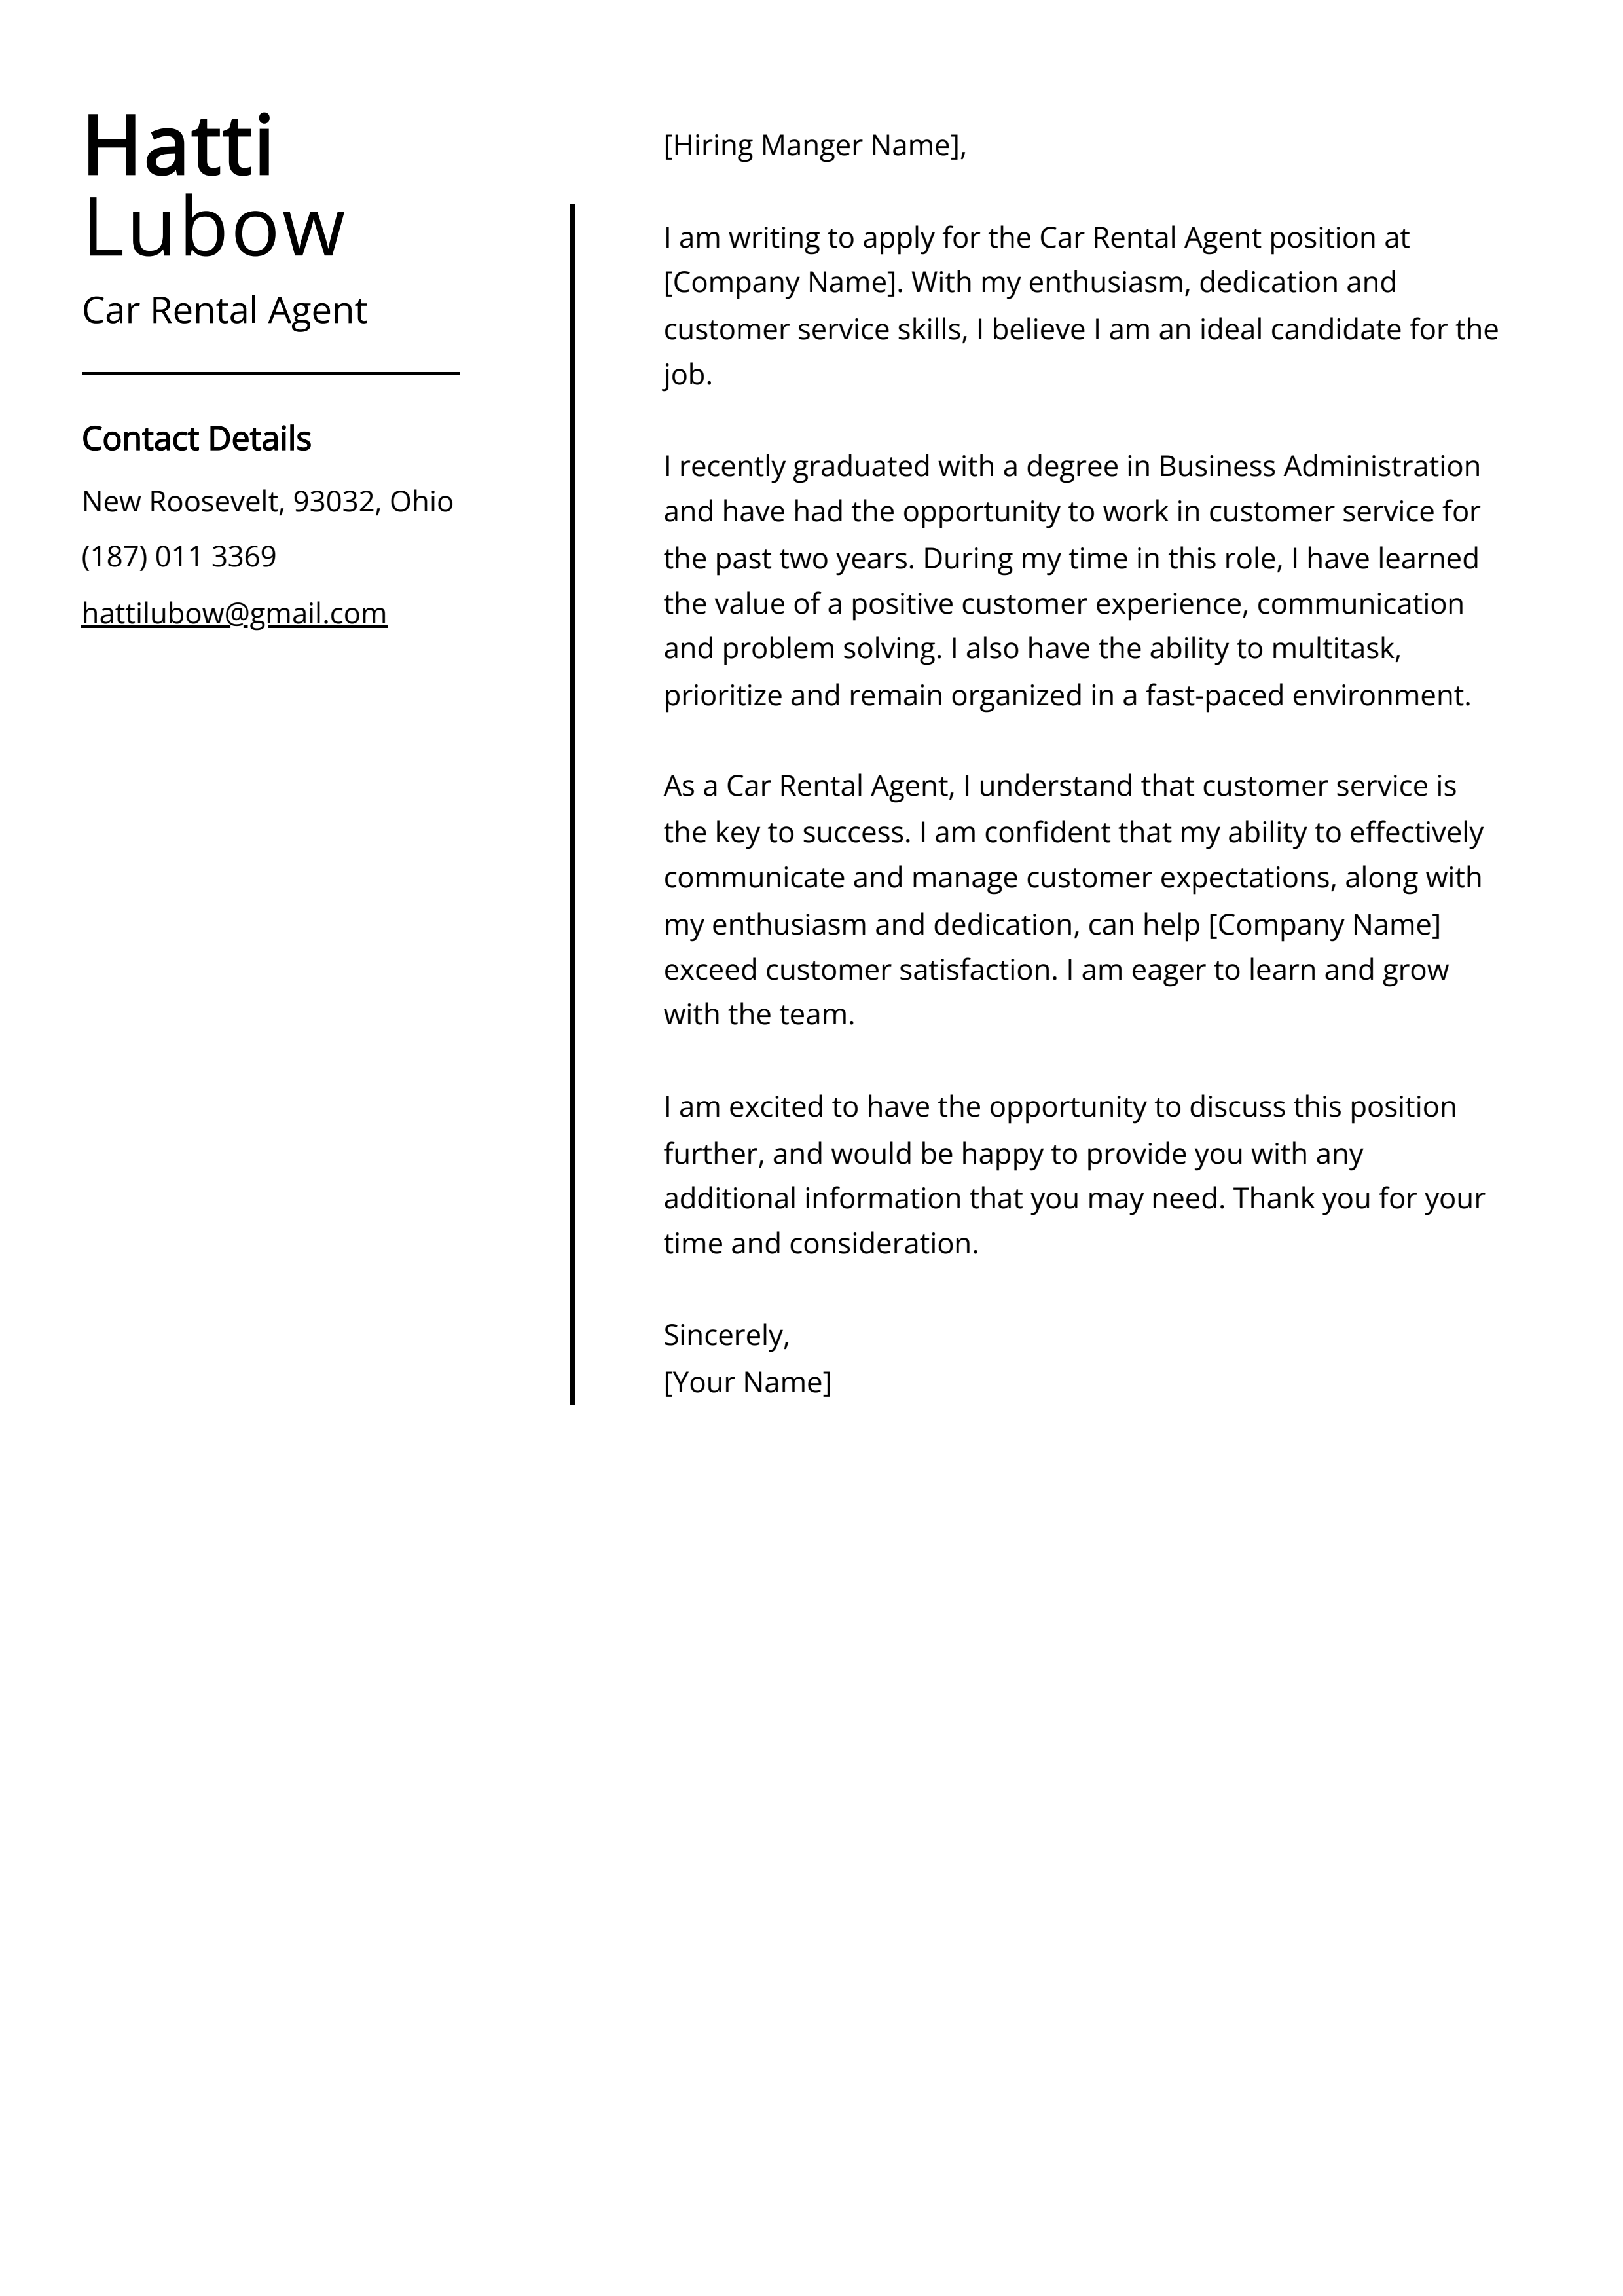 Car Rental Agent Cover Letter Example